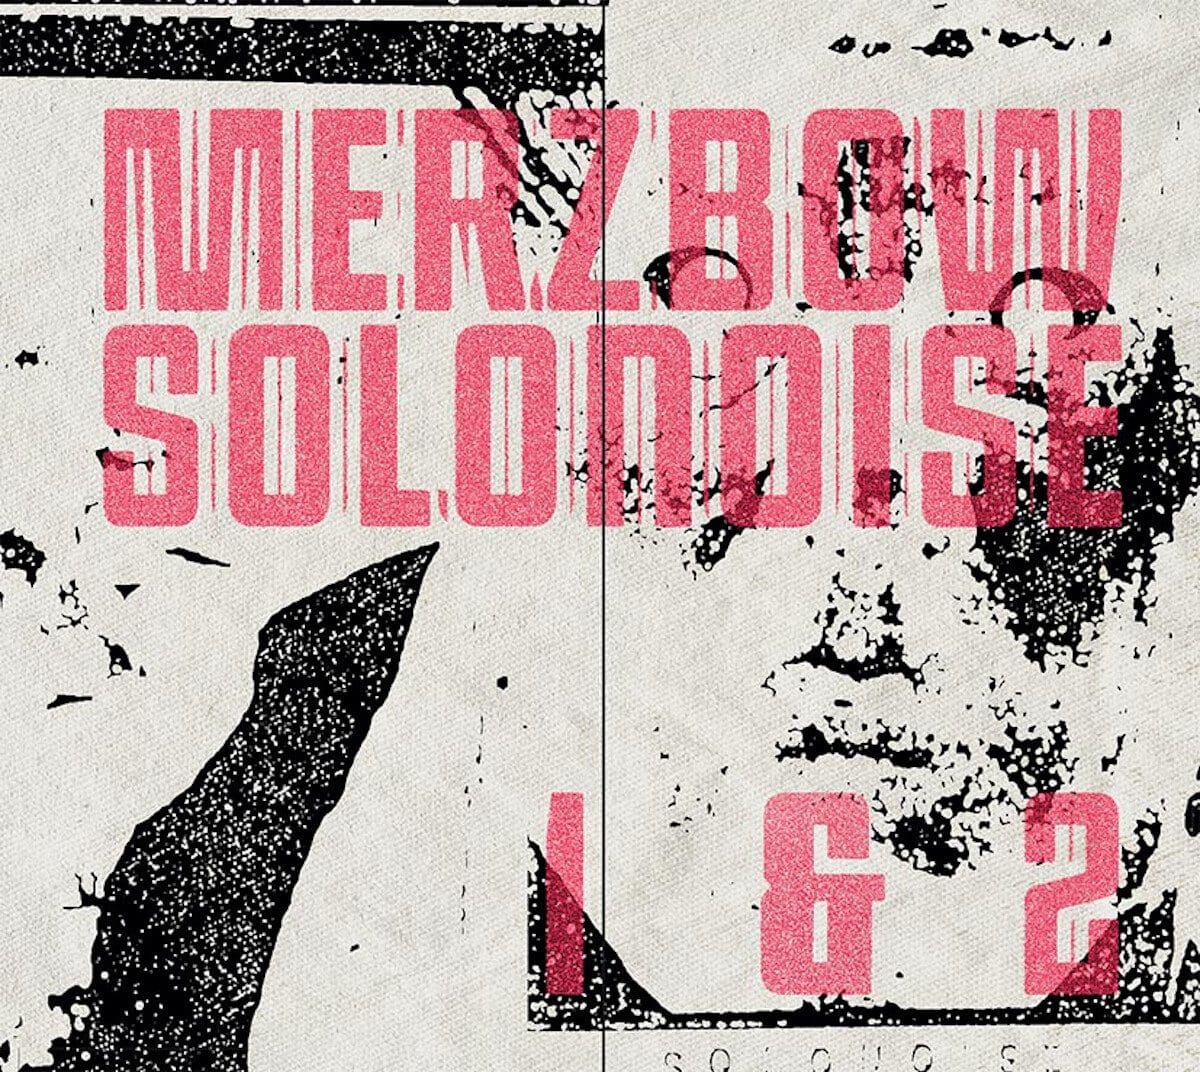 Merzbow sees two legendary tapes released on (double)CD for the very first time: 'Solonoise 1&2'